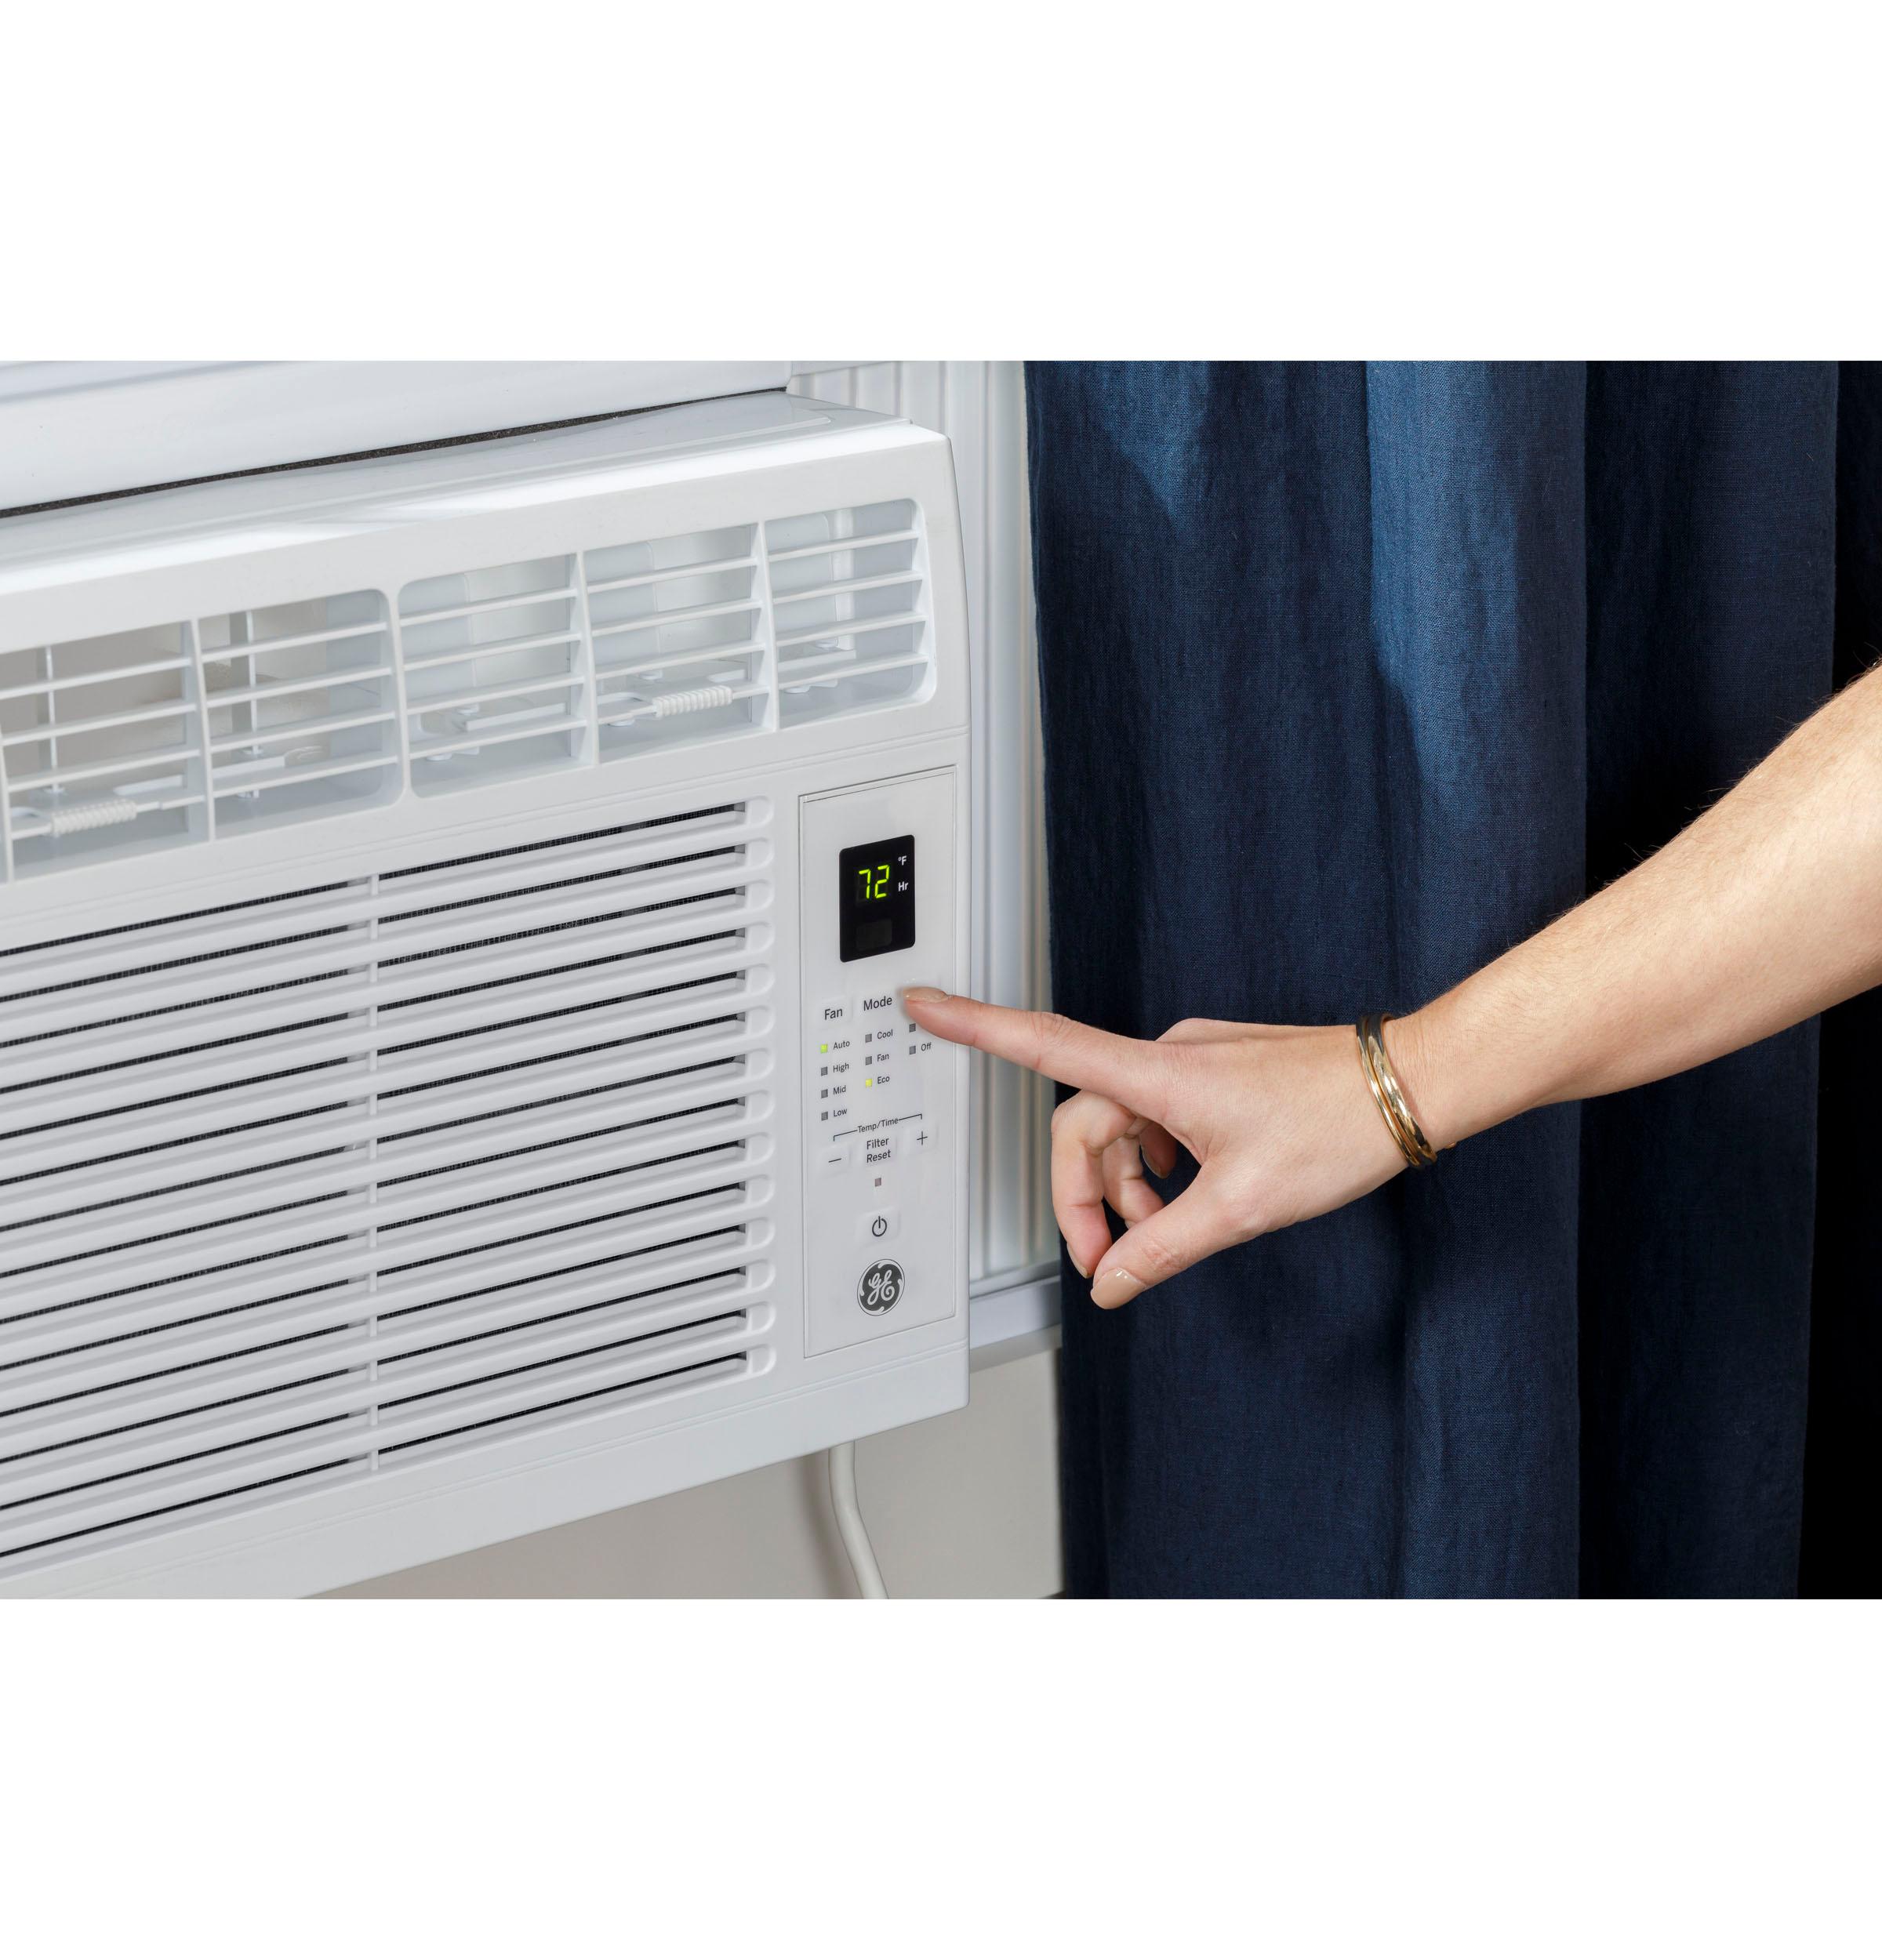 GE® 5,000 BTU Electronic Window Air Conditioner for Small Rooms up to 150 sq ft. in White size 12 9/16 H x 16 7/16 W x 15 D